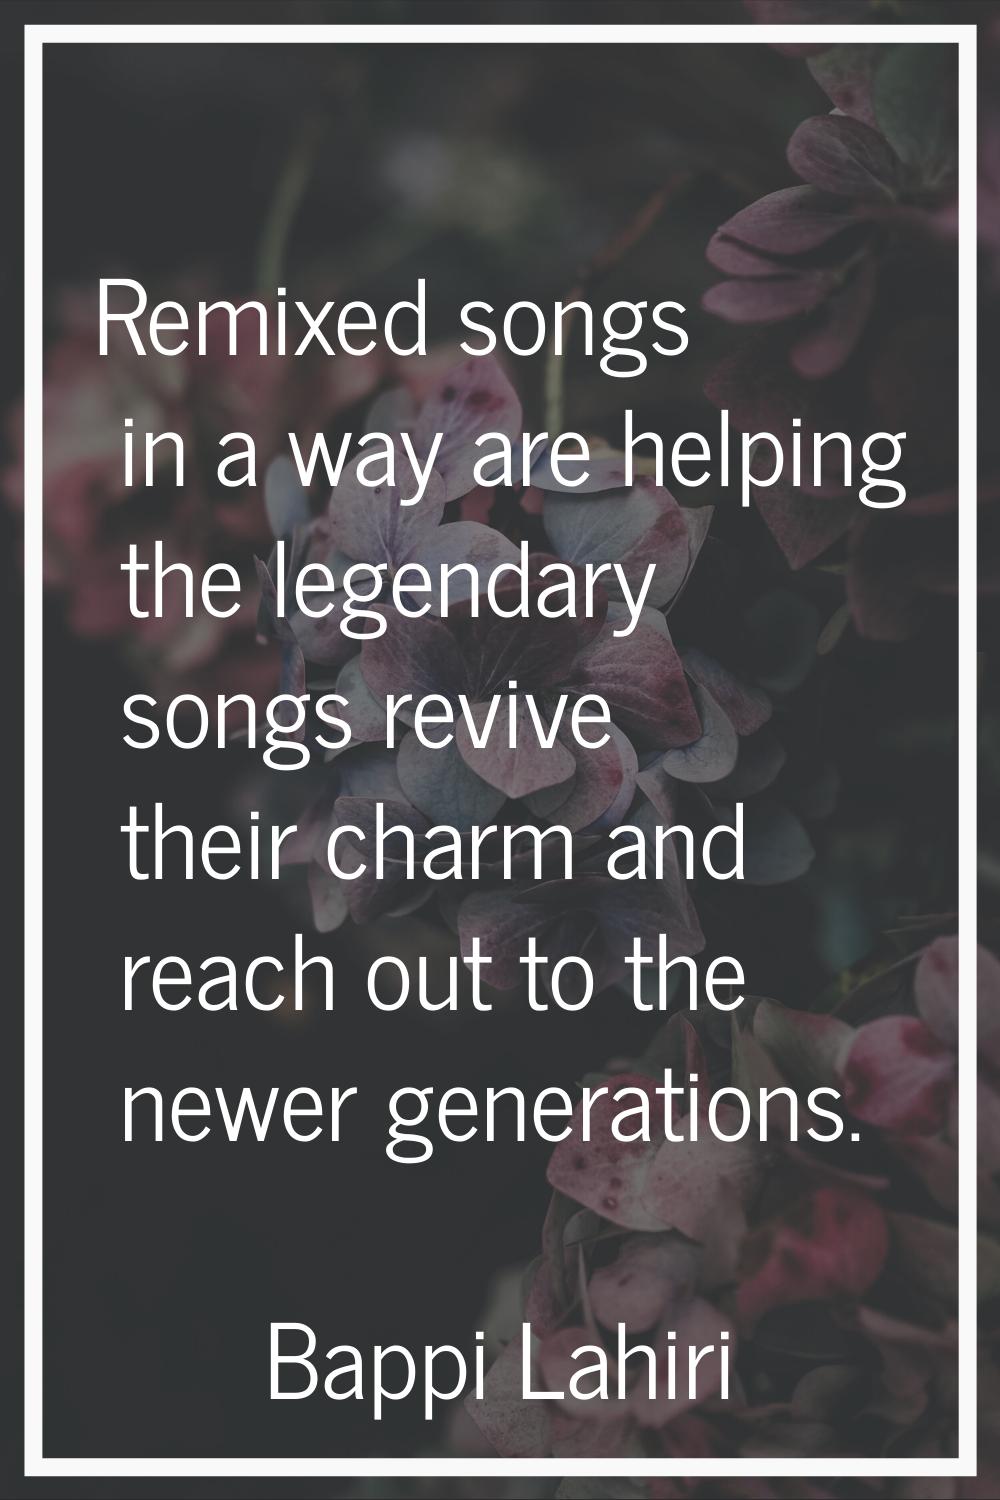 Remixed songs in a way are helping the legendary songs revive their charm and reach out to the newe